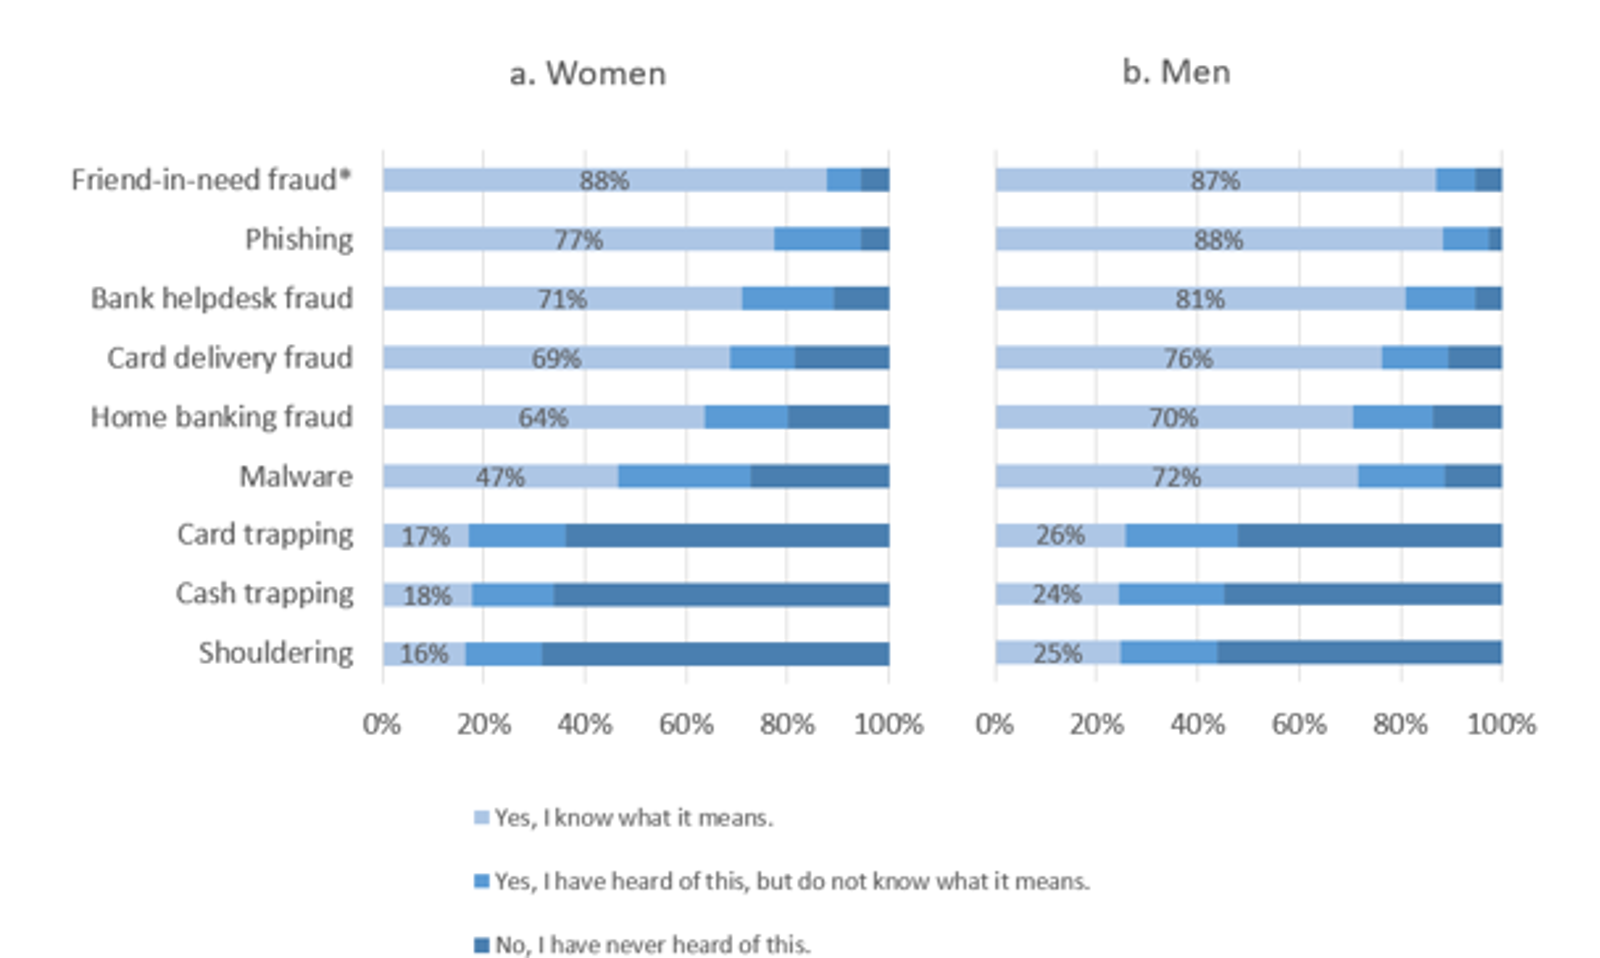 Figure 3. Women have less knowledge about fraud than men